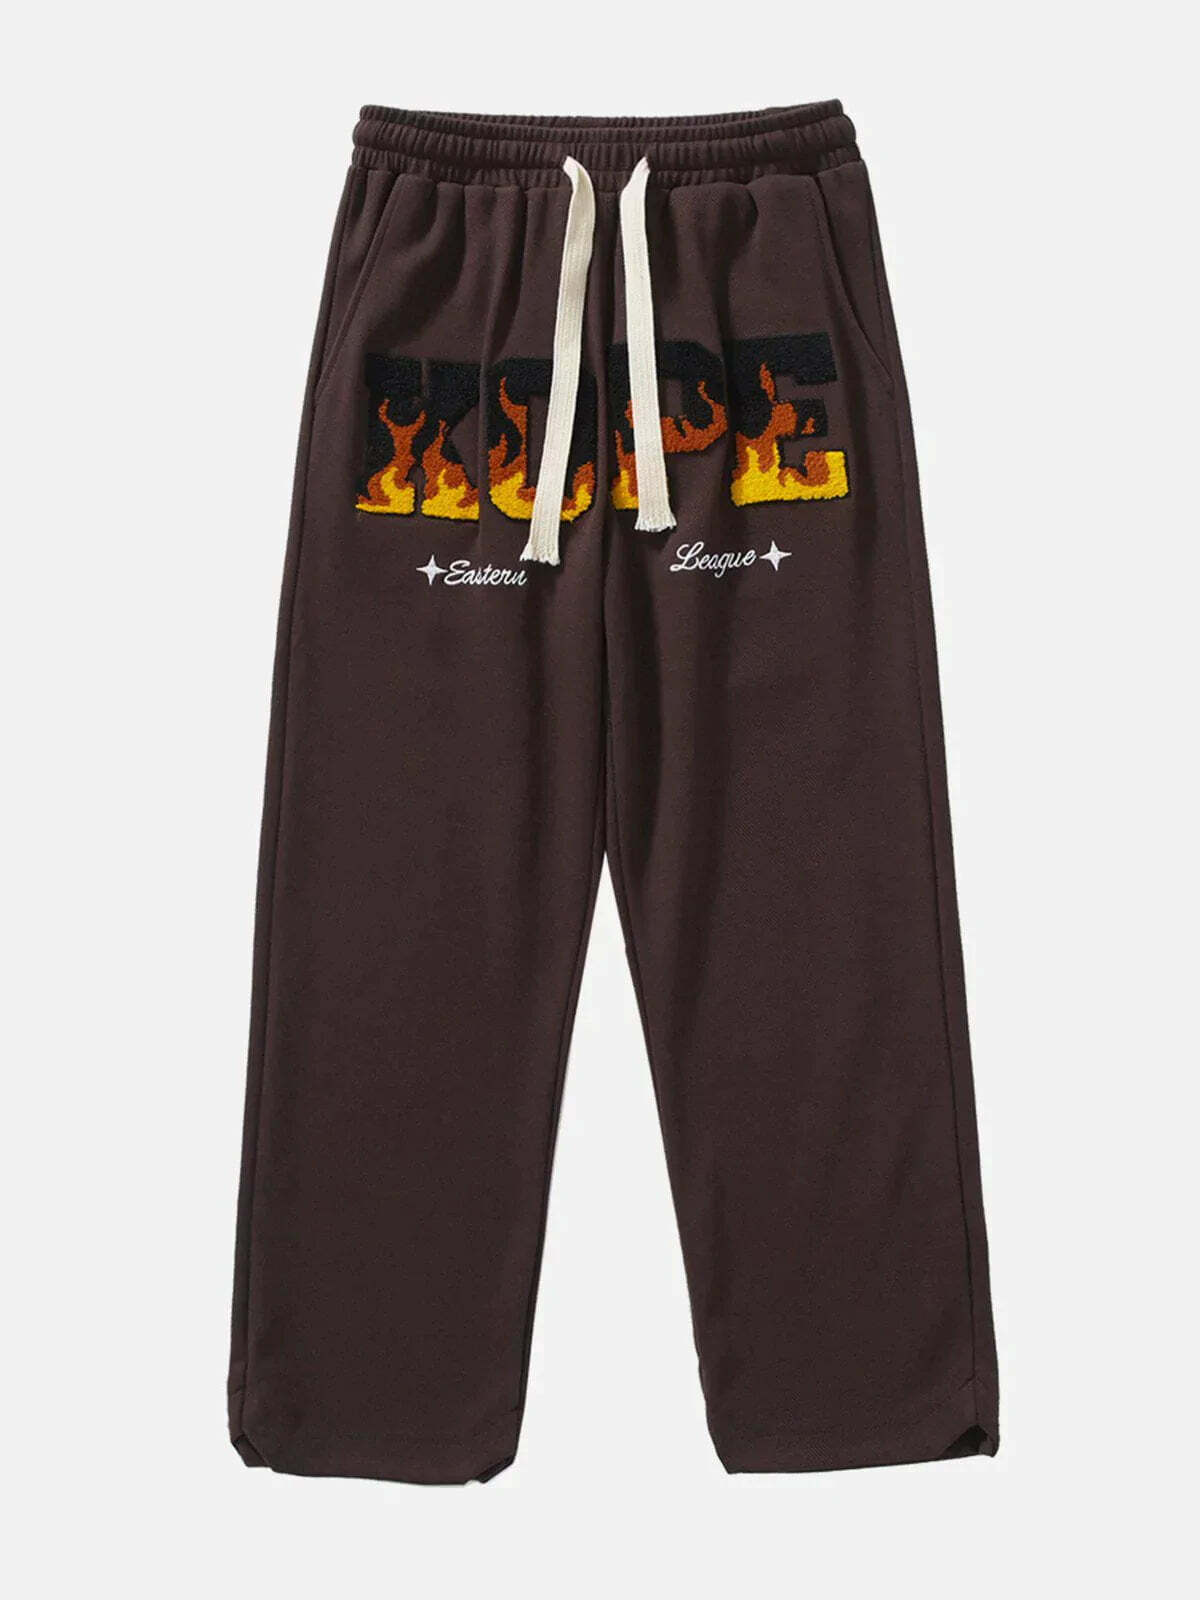 flaming letters sweatpants edgy & vibrant streetwear 5652